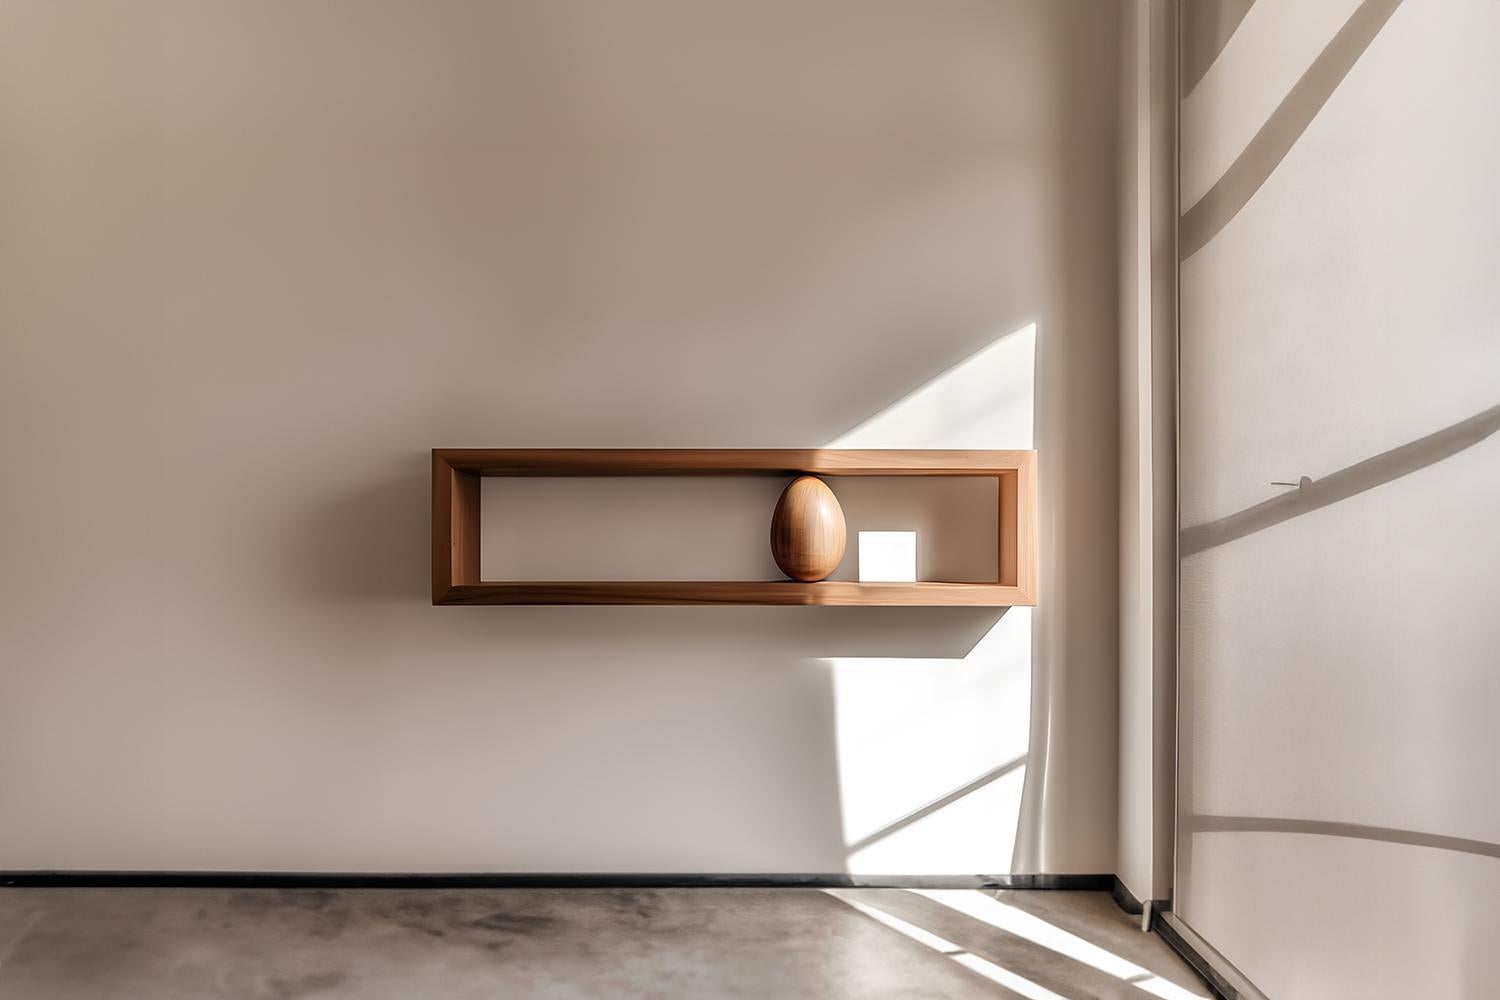 Rectangular Floating Shelf with Close Back and One Large Sculptural Wooden Pebble Accent, Sereno by Joel Escalona
—

What happens when the practical becomes art?
What happens when ornamentation gains significance?

Those were the questions